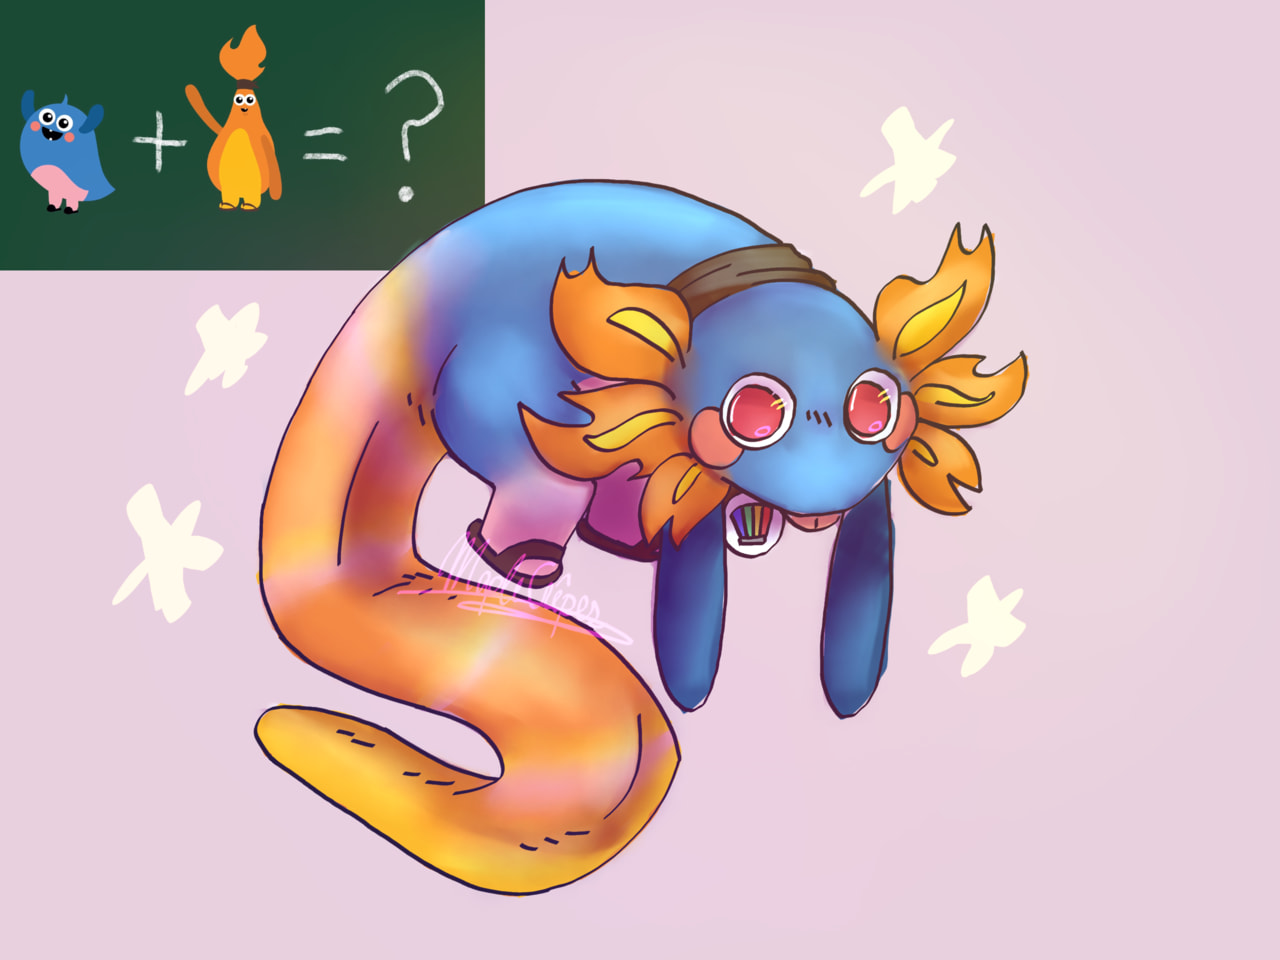 edit: ty for the feature!
#ottelchallenge pt. 2 for the fusion! i had an epiphany after the first one lol
axel+otto=axelotto, which sounds like an axolotl!! so Behold, an #Axelottol!!
#otto #axel #axolotl #Fusion #FusionChallenge #ottoworld #sonysketch 